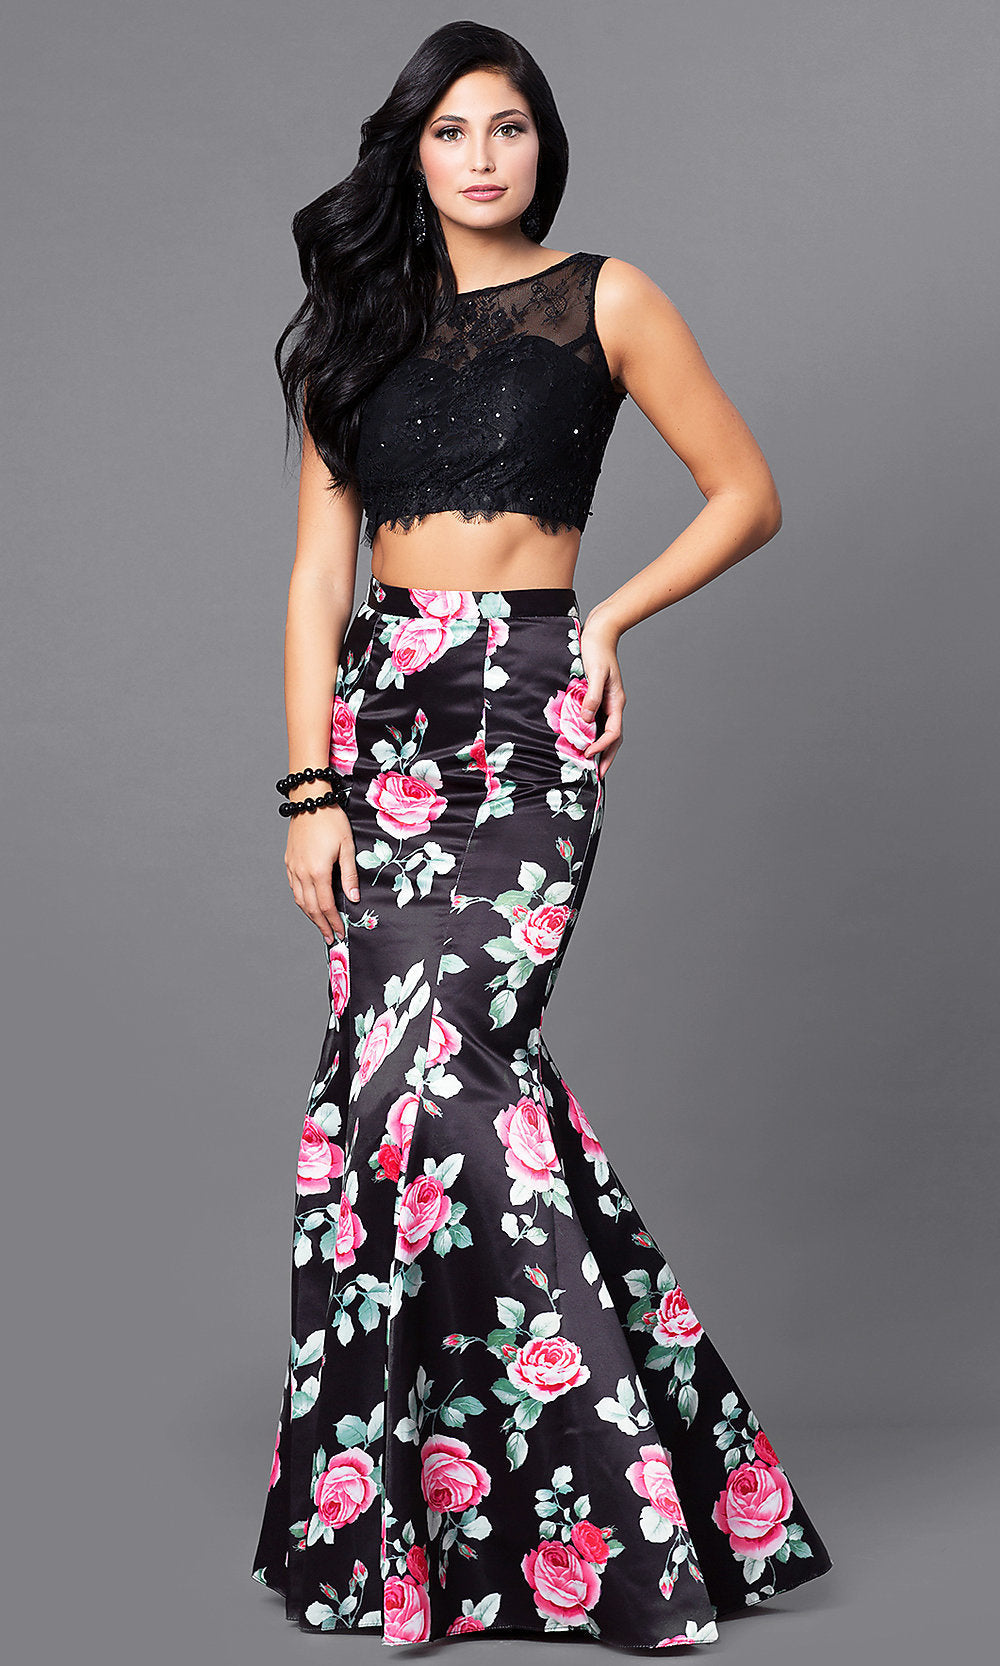 Black Floral-Print Skirt and Lace-Top Black Prom Dress